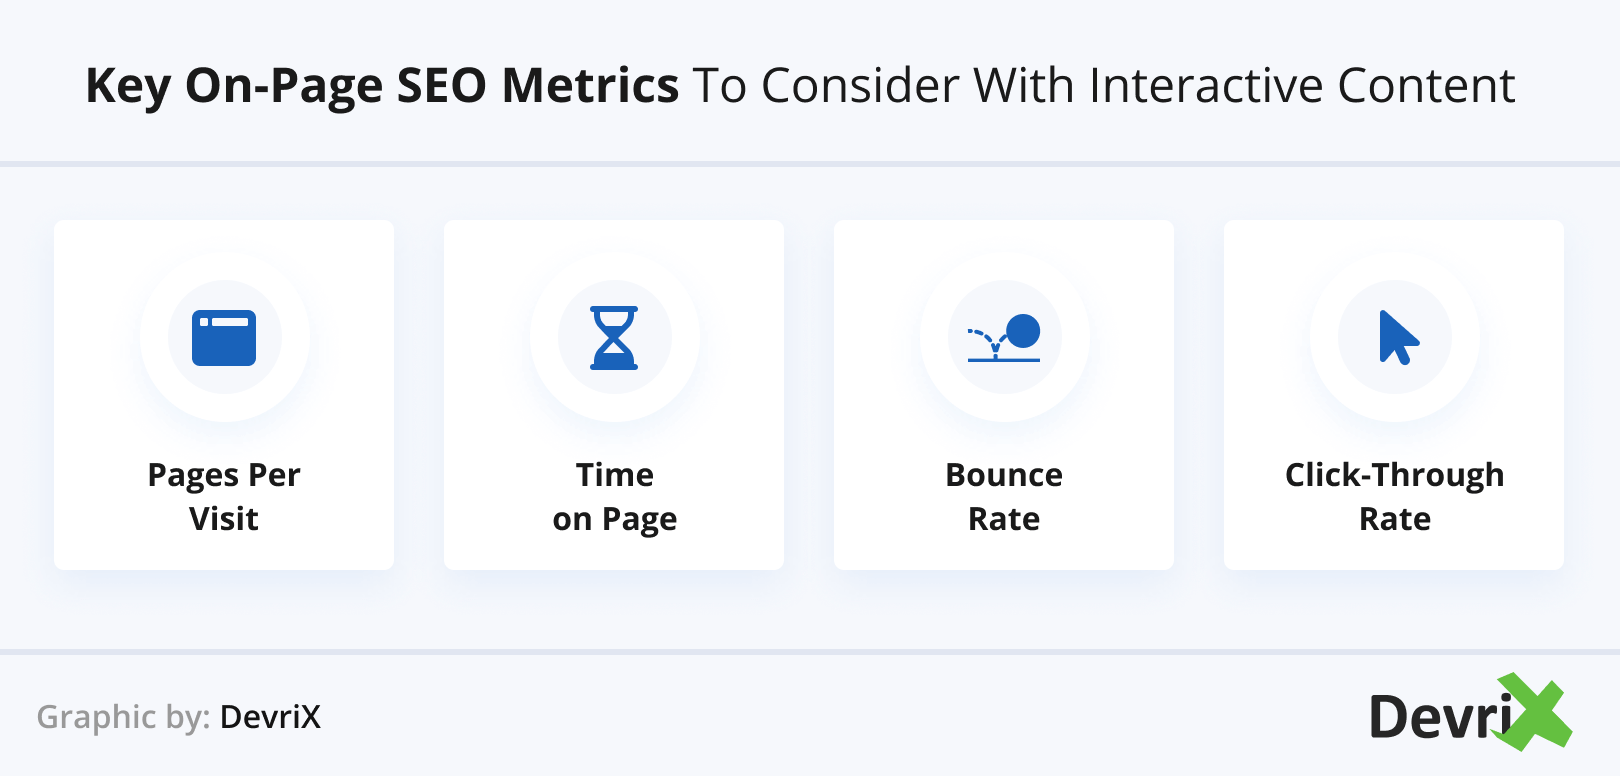 Key On-page SEO Metrics to Consider with Interactive Content